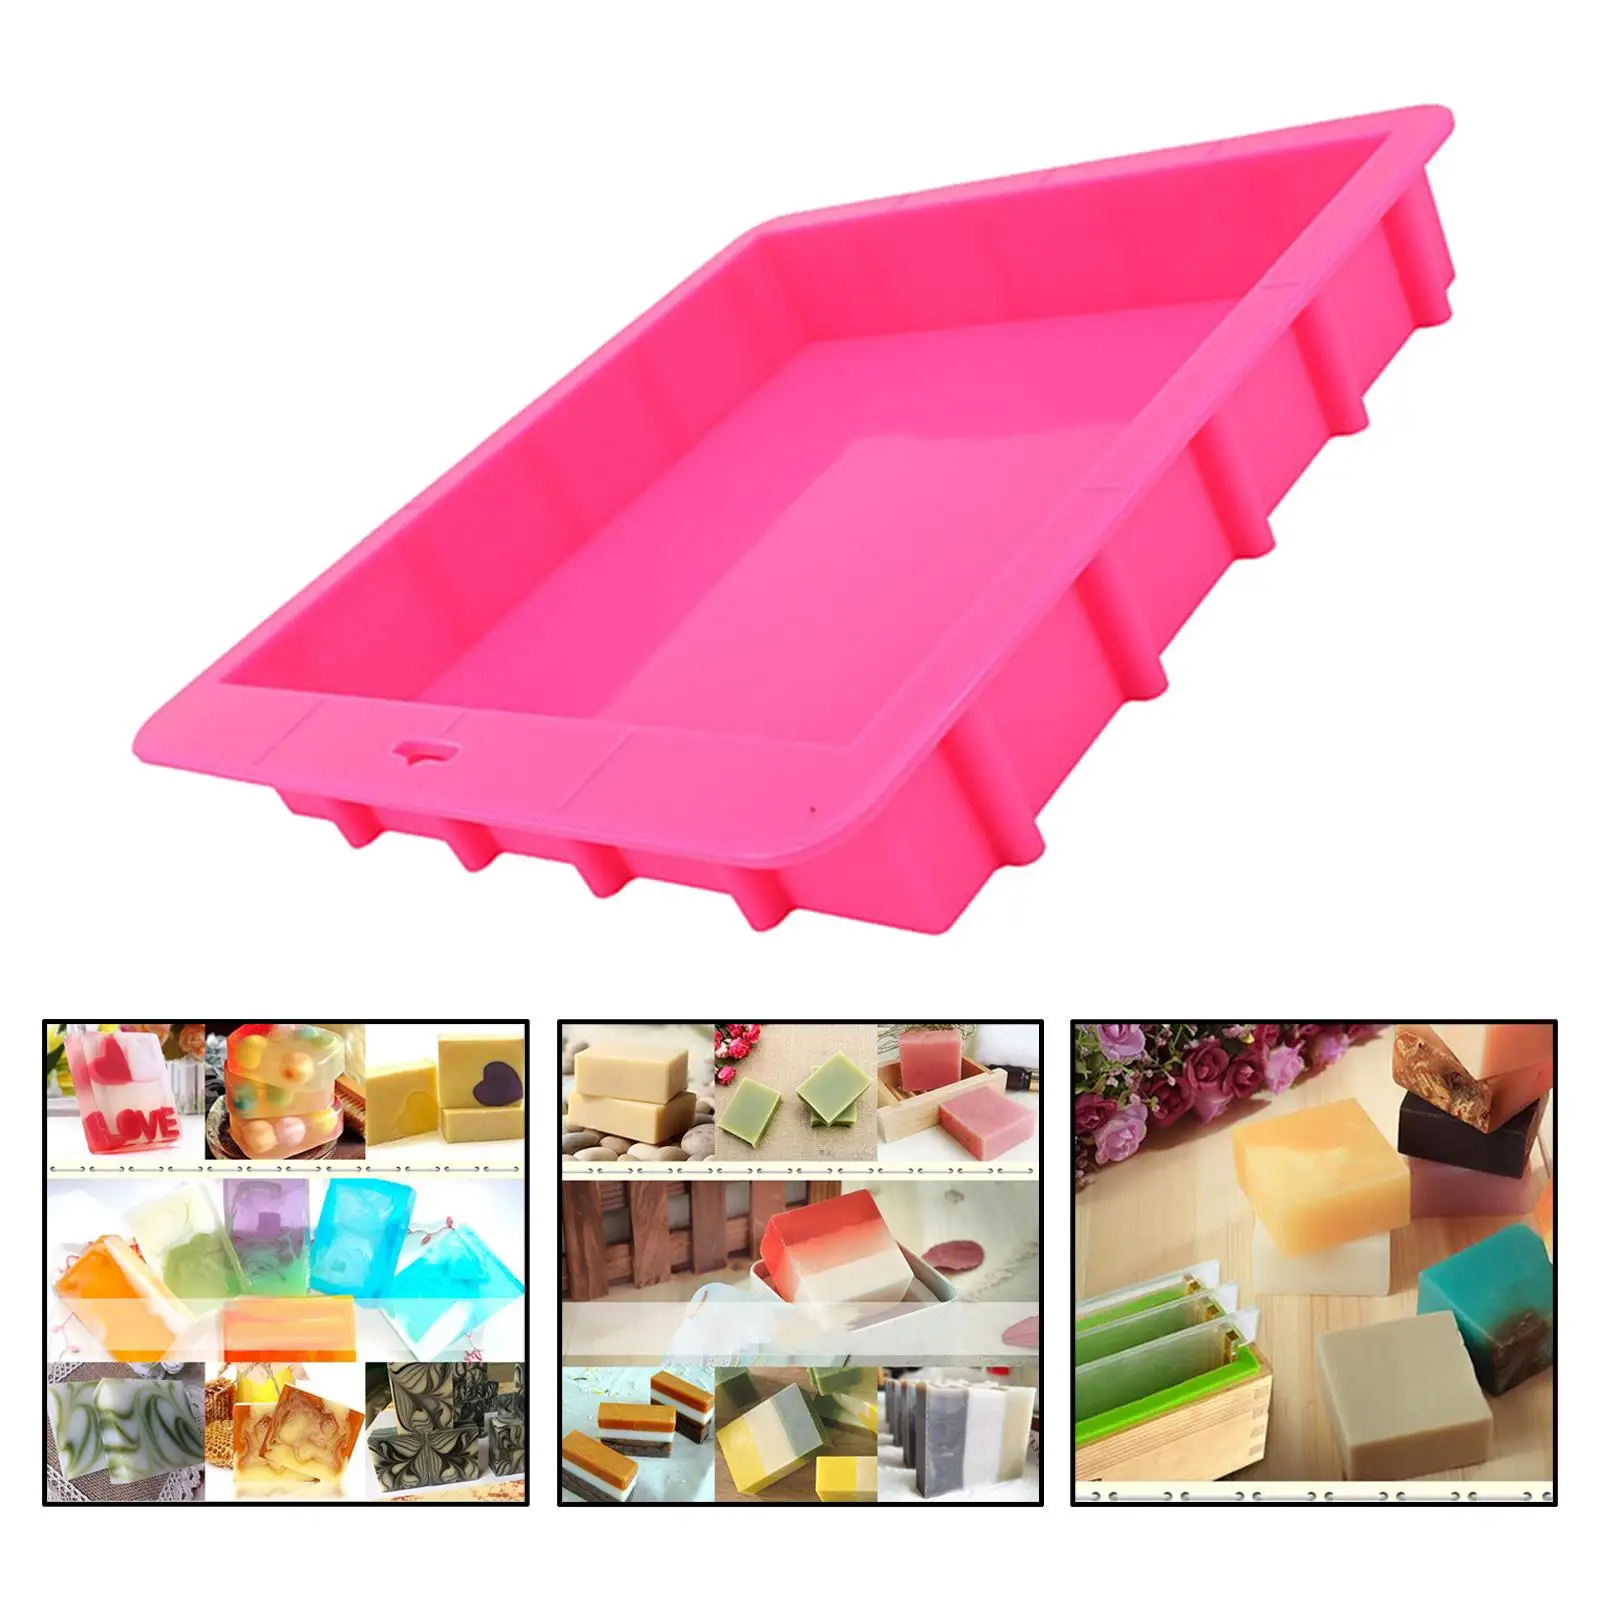 Rectangular Shape Soap Making Mould Silicone Mold for Cake Aromatherapy Baking Accessories